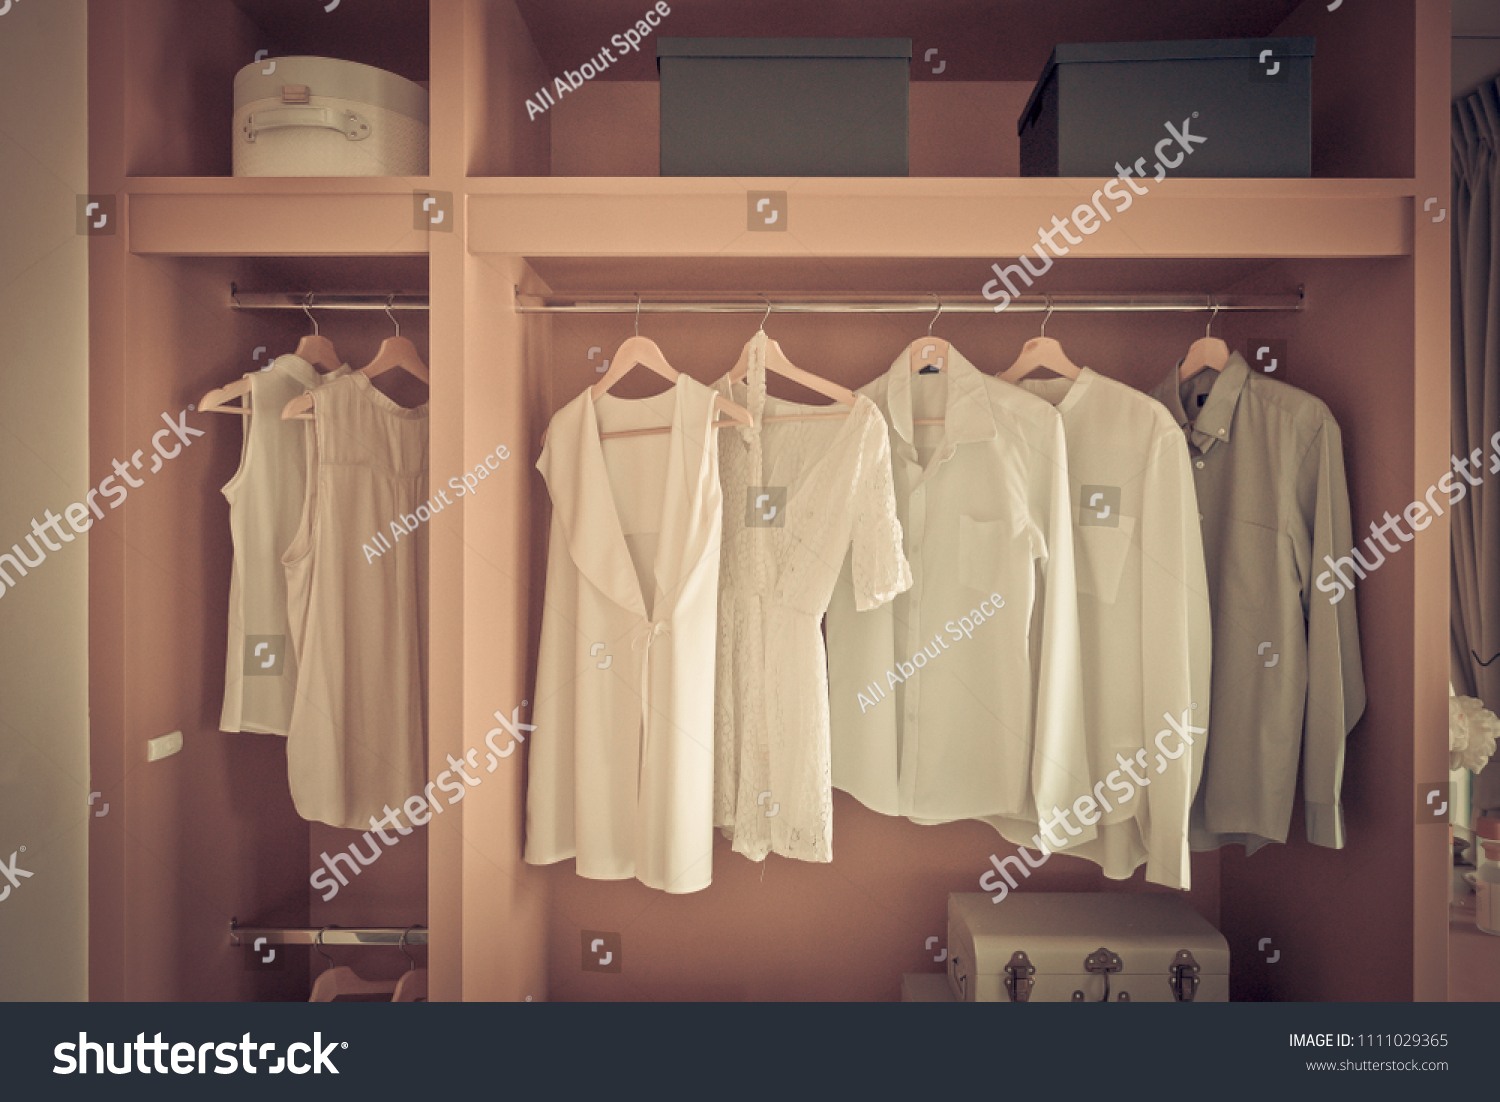 white color shirts hanging on rail in modern wooden closet, interior design concept, vintage style process #1111029365